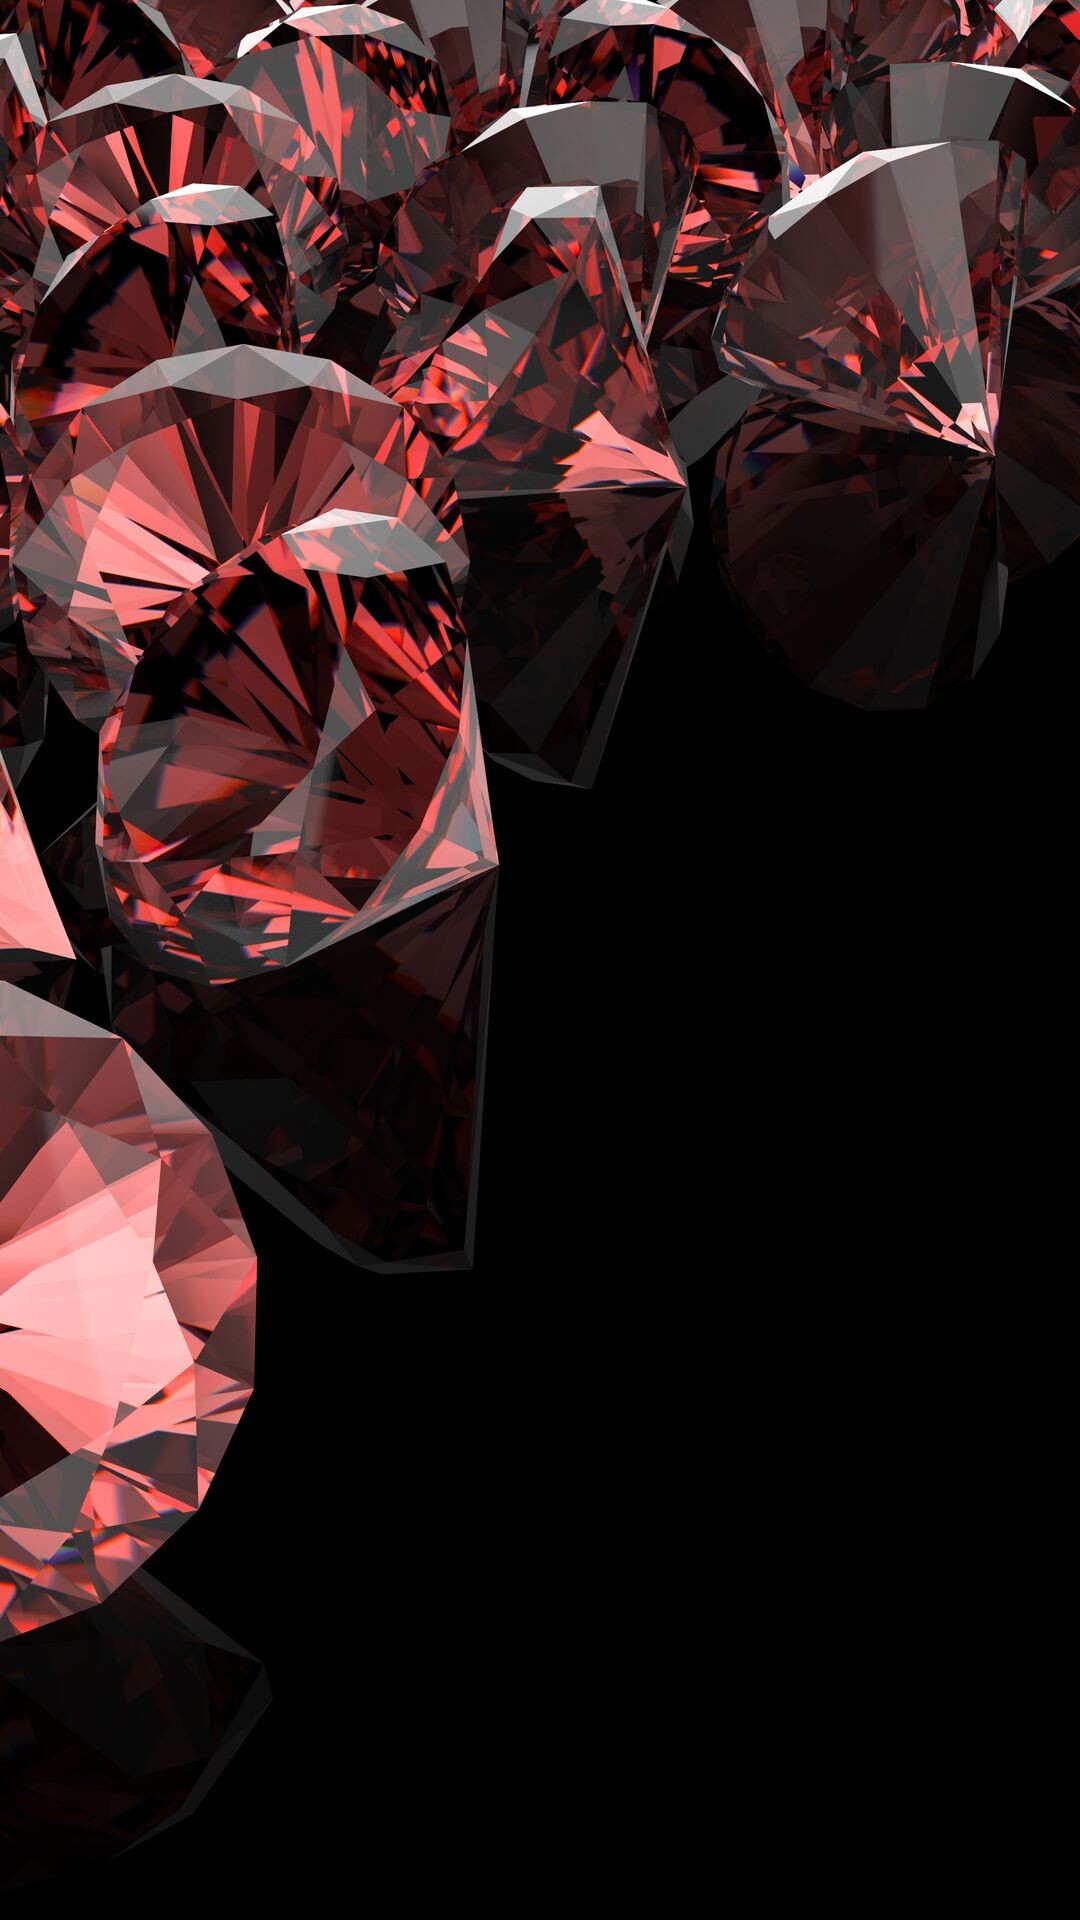 Gemstone: Red diamond, A petrified material that when cut and polished can be used in jewelry. 1080x1920 Full HD Wallpaper.